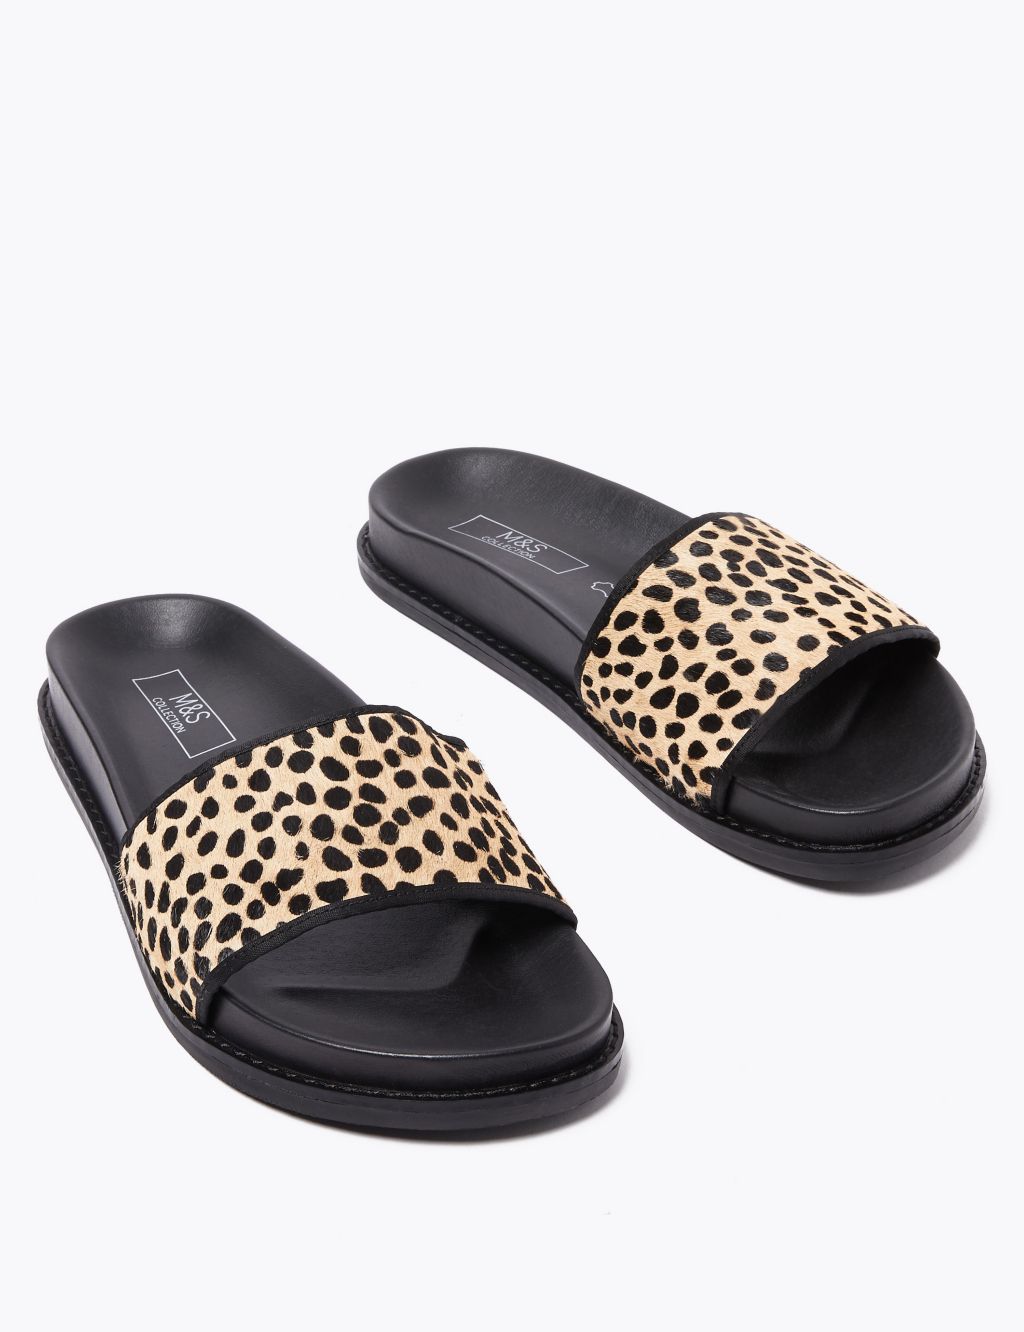 Suede Leopard Print Sliders | M&S Collection | M&S